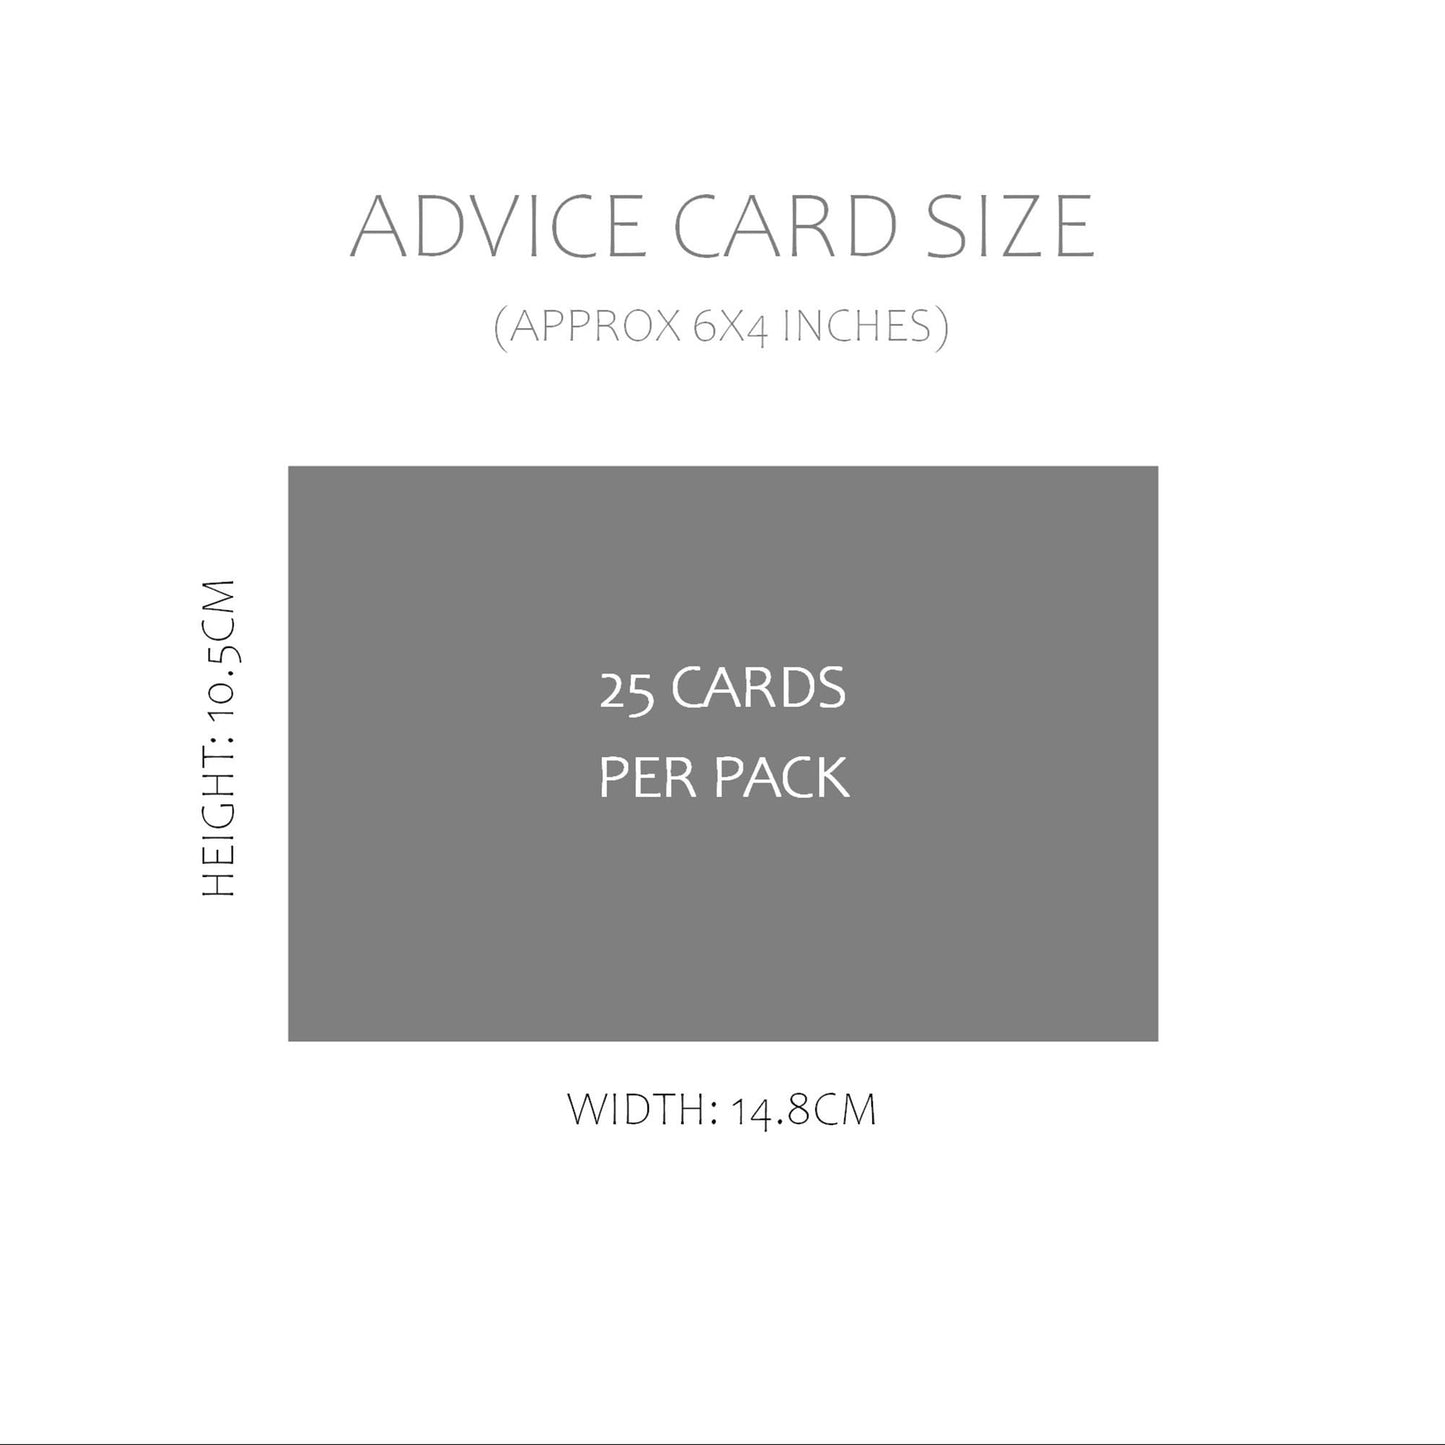 Black & Gold Wedding Advice Cards - Pack Of 25